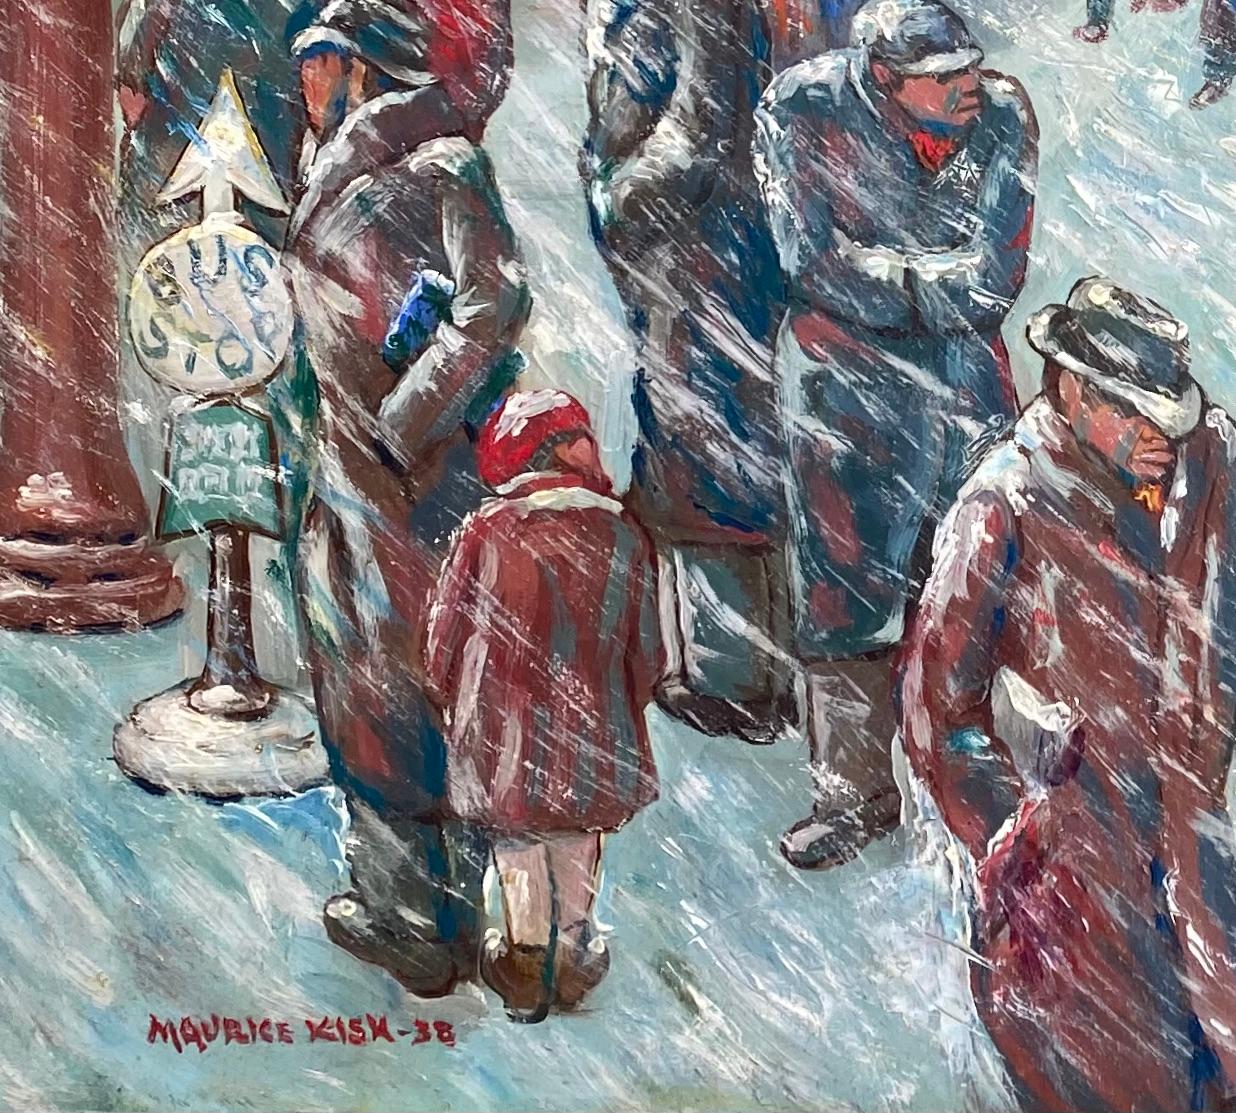 Waiting for the Bus in a Blizzard- WPA Amerikanische Szene 1938 NYC Modernismus Realismus – Painting von Maurice Kish